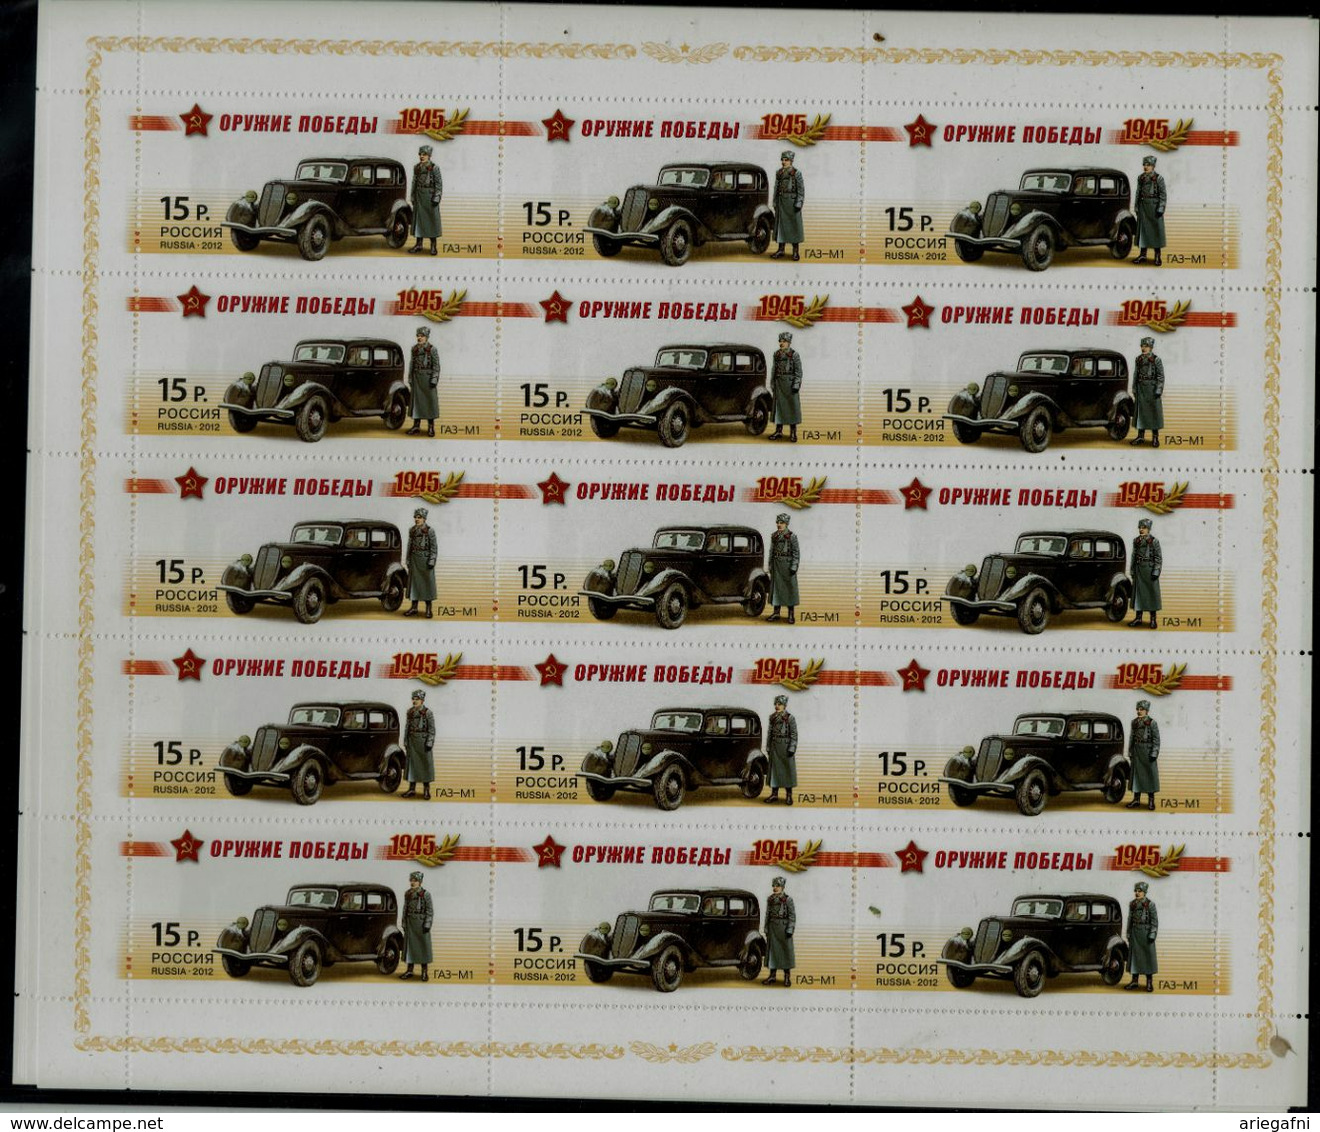 RUSSIA 2012 ARMS OF VICTORY: MOTOR VEHICLES SET OF 4 FULL SHEET MI No 181-4 MNH VF !! - Full Sheets